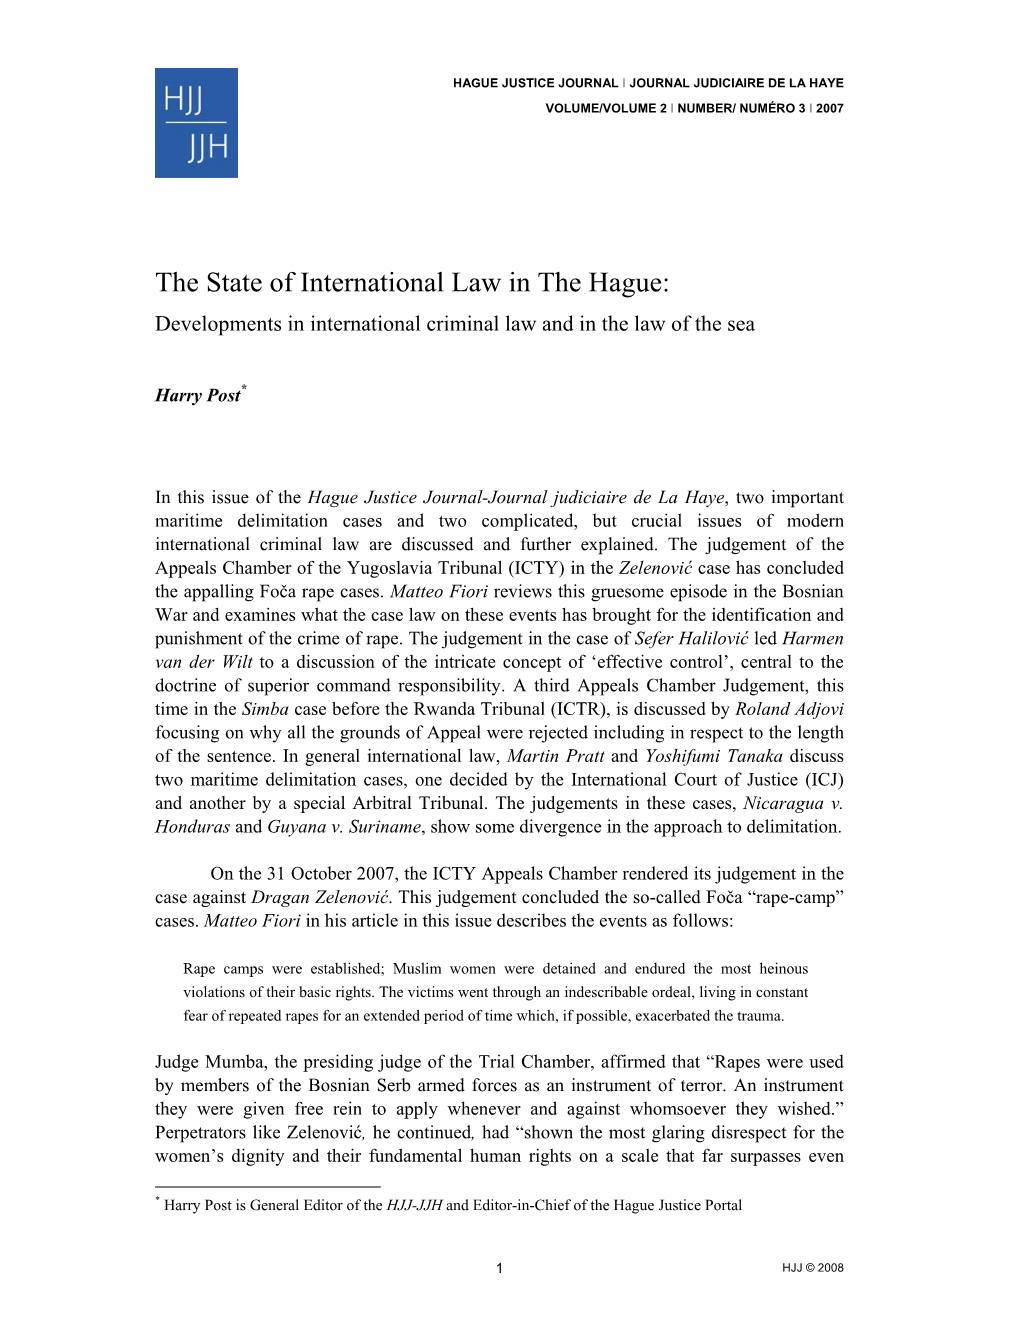 The State of International Law in the Hague: Developments in International Criminal Law and in the Law of the Sea